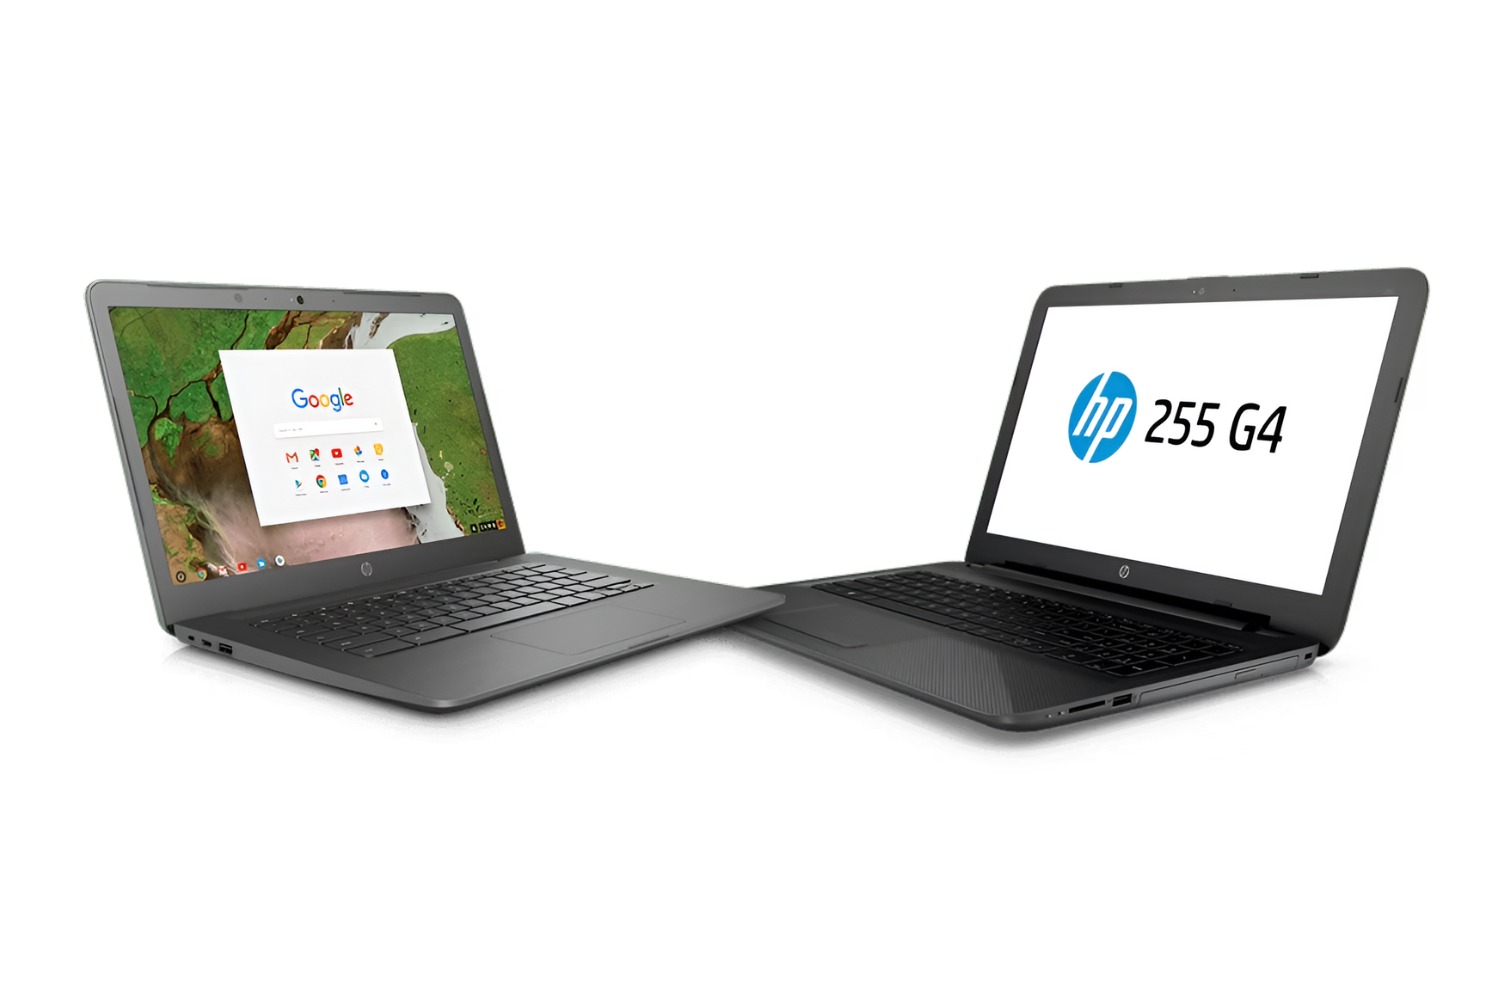 What Is The Difference Between Chromebook And Ultrabook